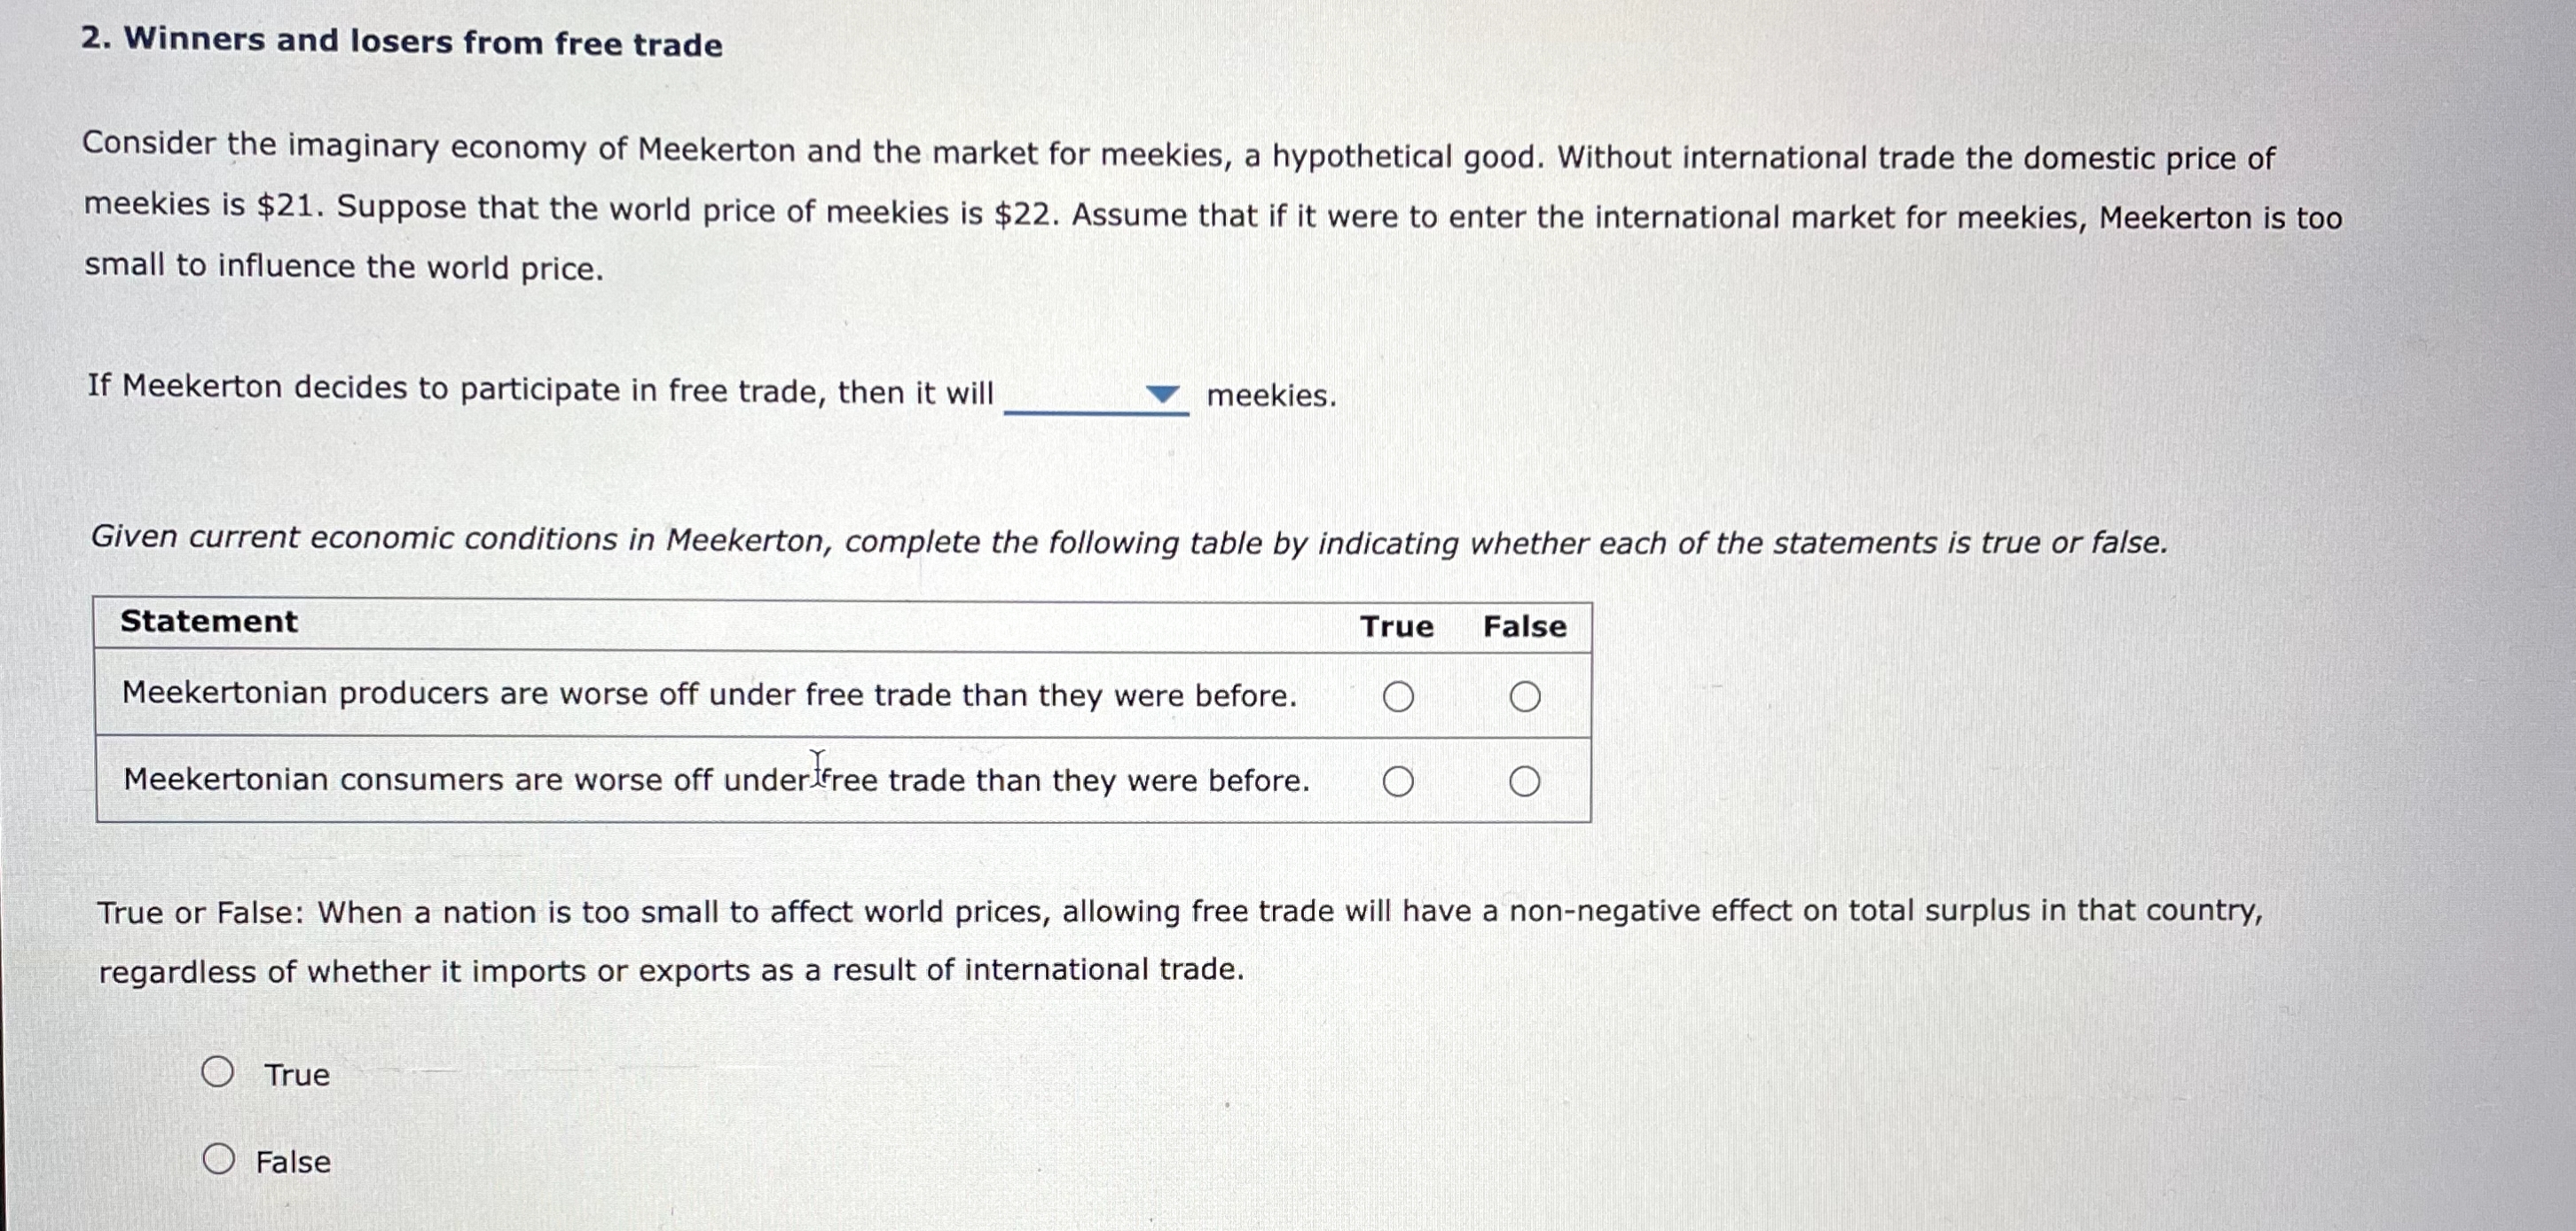 2. Winners and losers from free trade
Consider the imaginary economy of Meekerton and the market for meekies, a hypothetical good. Without international trade the domestic price of
meekies is $21. Suppose that the world price of meekies is $22. Assume that if it were to enter the international market for meekies, Meekerton is too
small to influence the world price.
If Meekerton decides to participate in free trade, then it will
Given current economic conditions in Meekerton, complete the following table by indicating whether each of the statements is true or false.
Statement
meekies.
Meekertonian producers are worse off under free trade than they were before.
Meekertonian consumers are worse off under free trade than they were before.
O True
O False
True
False
O
True or False: When a nation is too small to affect world prices, allowing free trade will have a non-negative effect on total surplus in that country,
regardless of whether it imports or exports as a result of international trade.